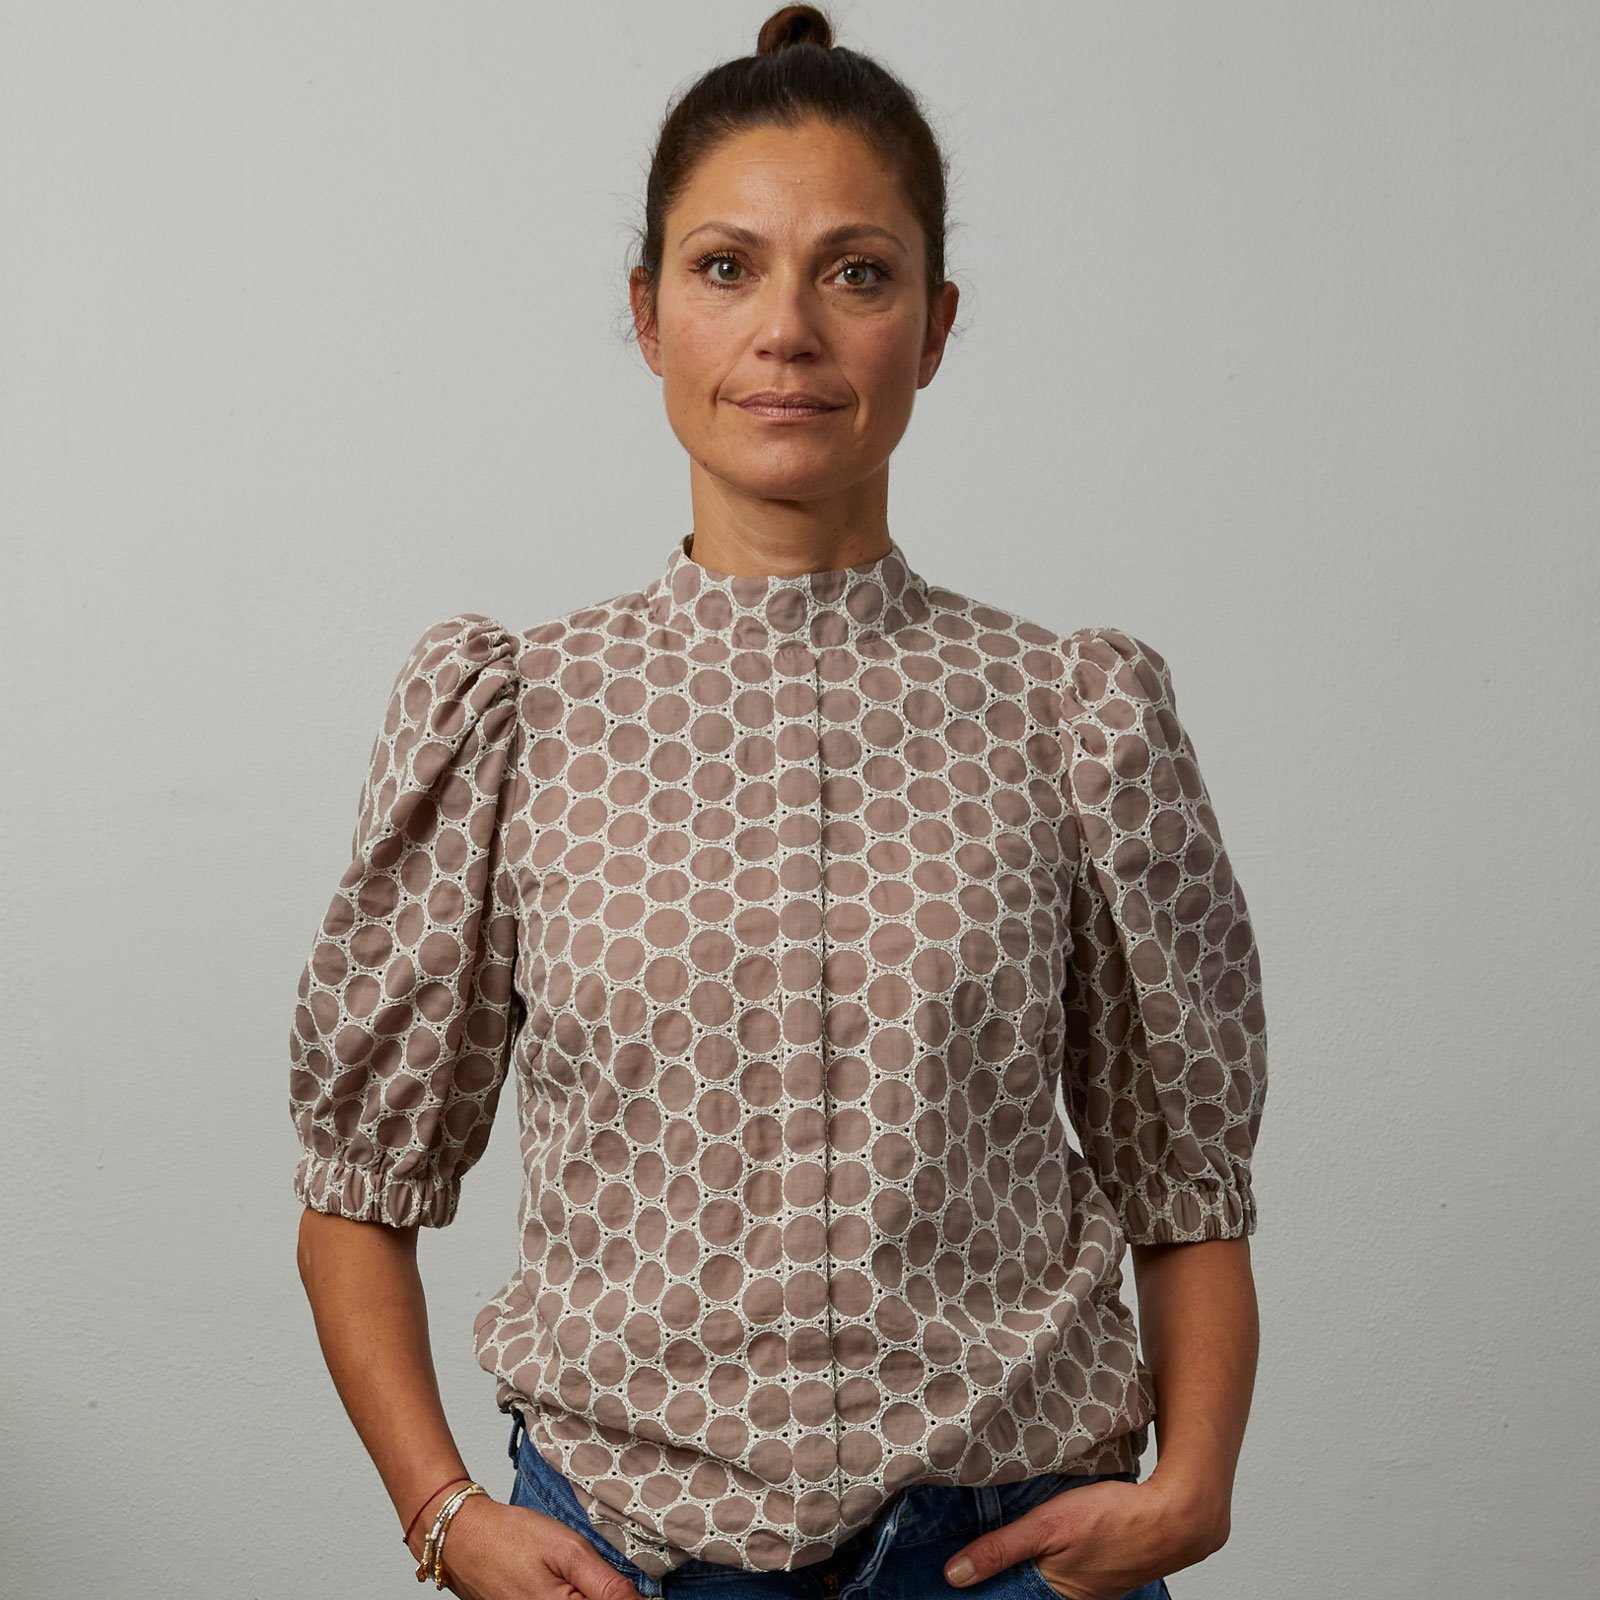 Design your own blouse, 46/18 p22075_cg_image_a.jpg